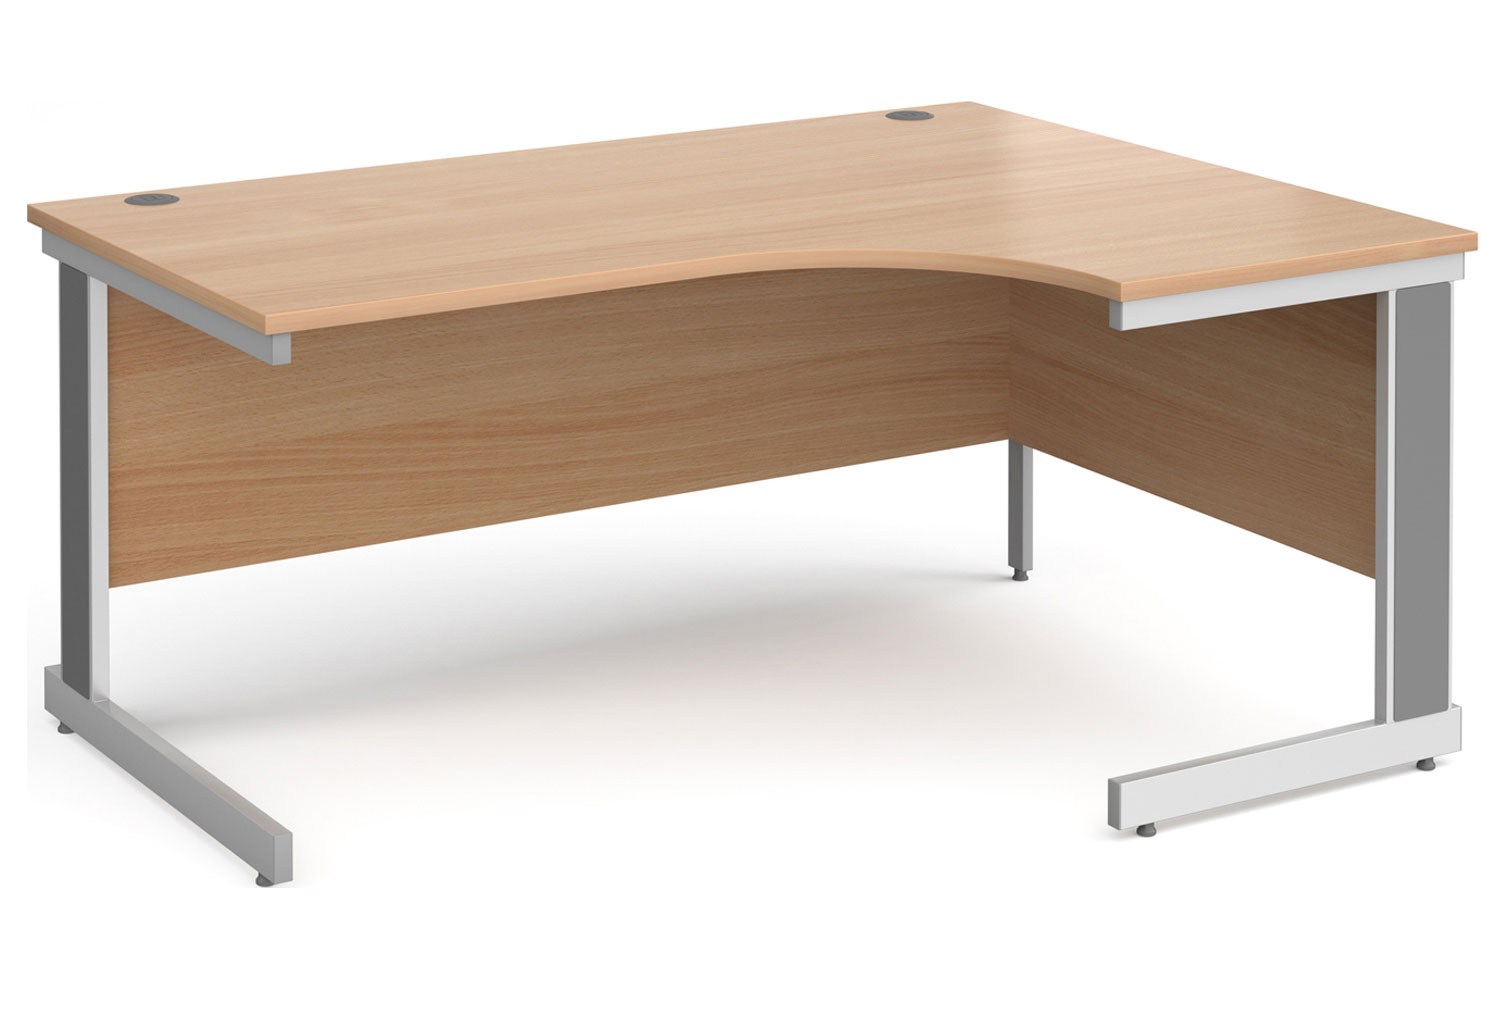 Tully Deluxe Right Hand Ergonomic Office Desk, 160wx120/80dx73h (cm), Beech, Express Delivery